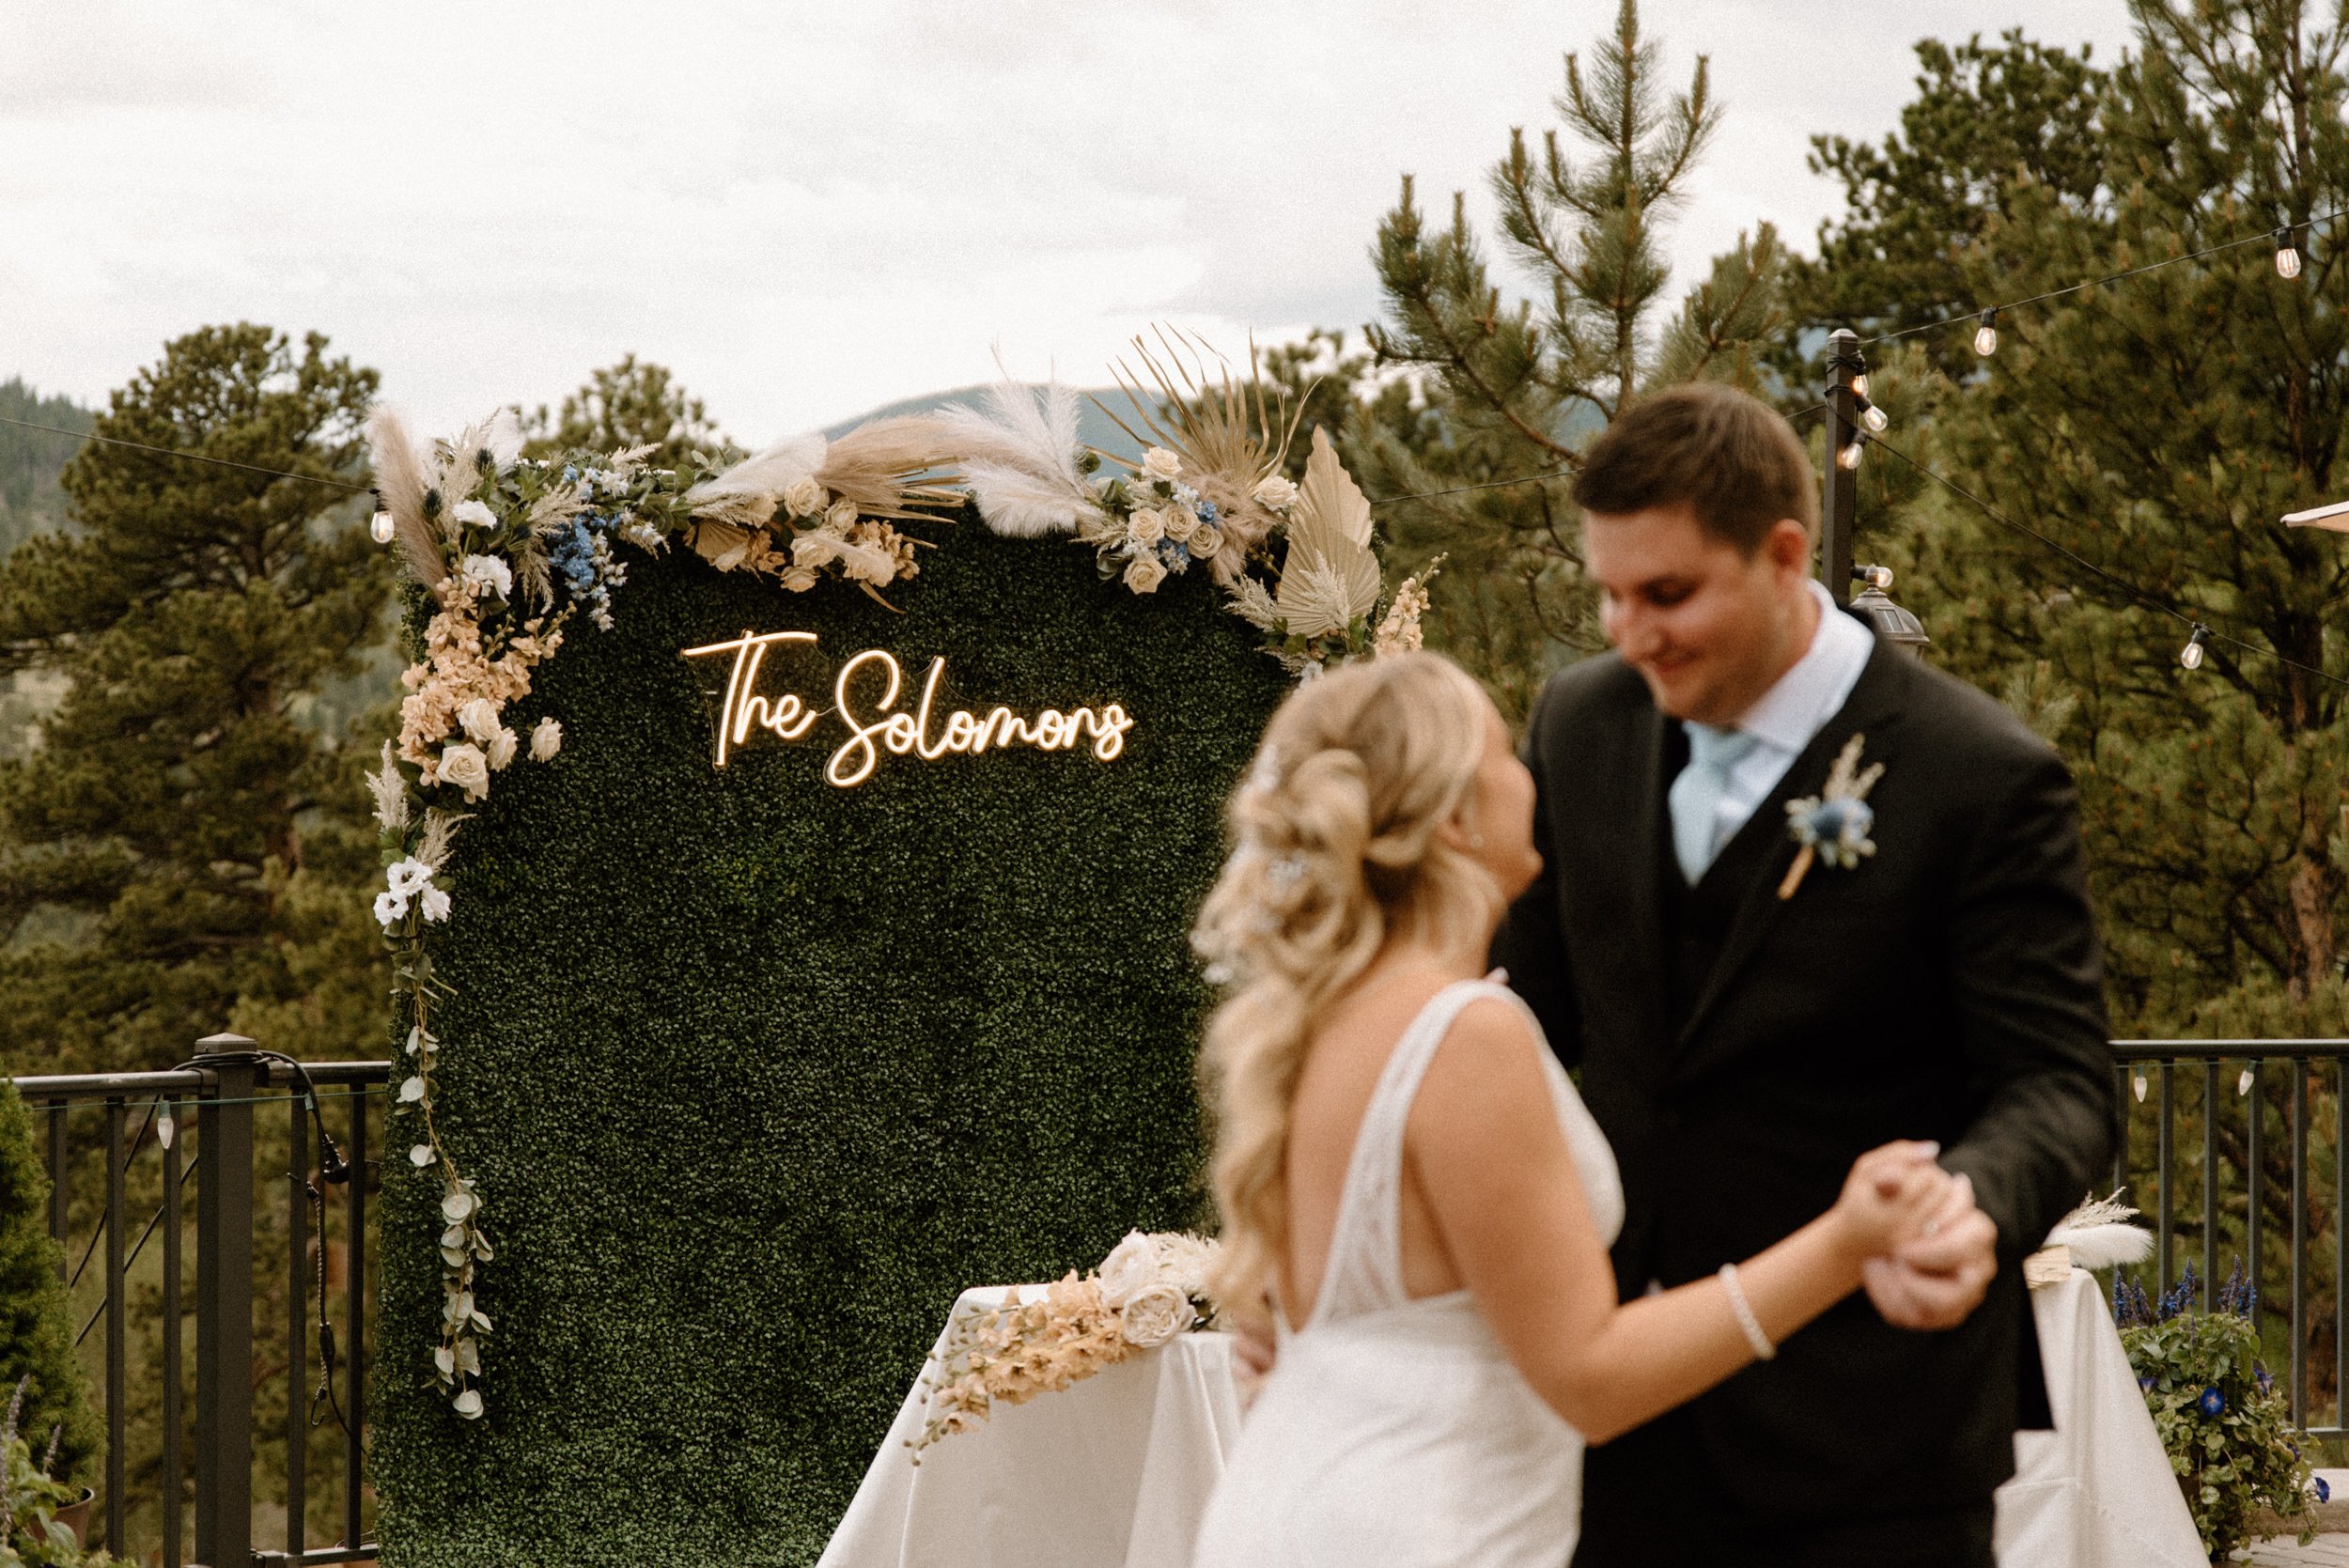 The bride and groom share their first dance as a neon sign that reads "The Solomons" shines in the background